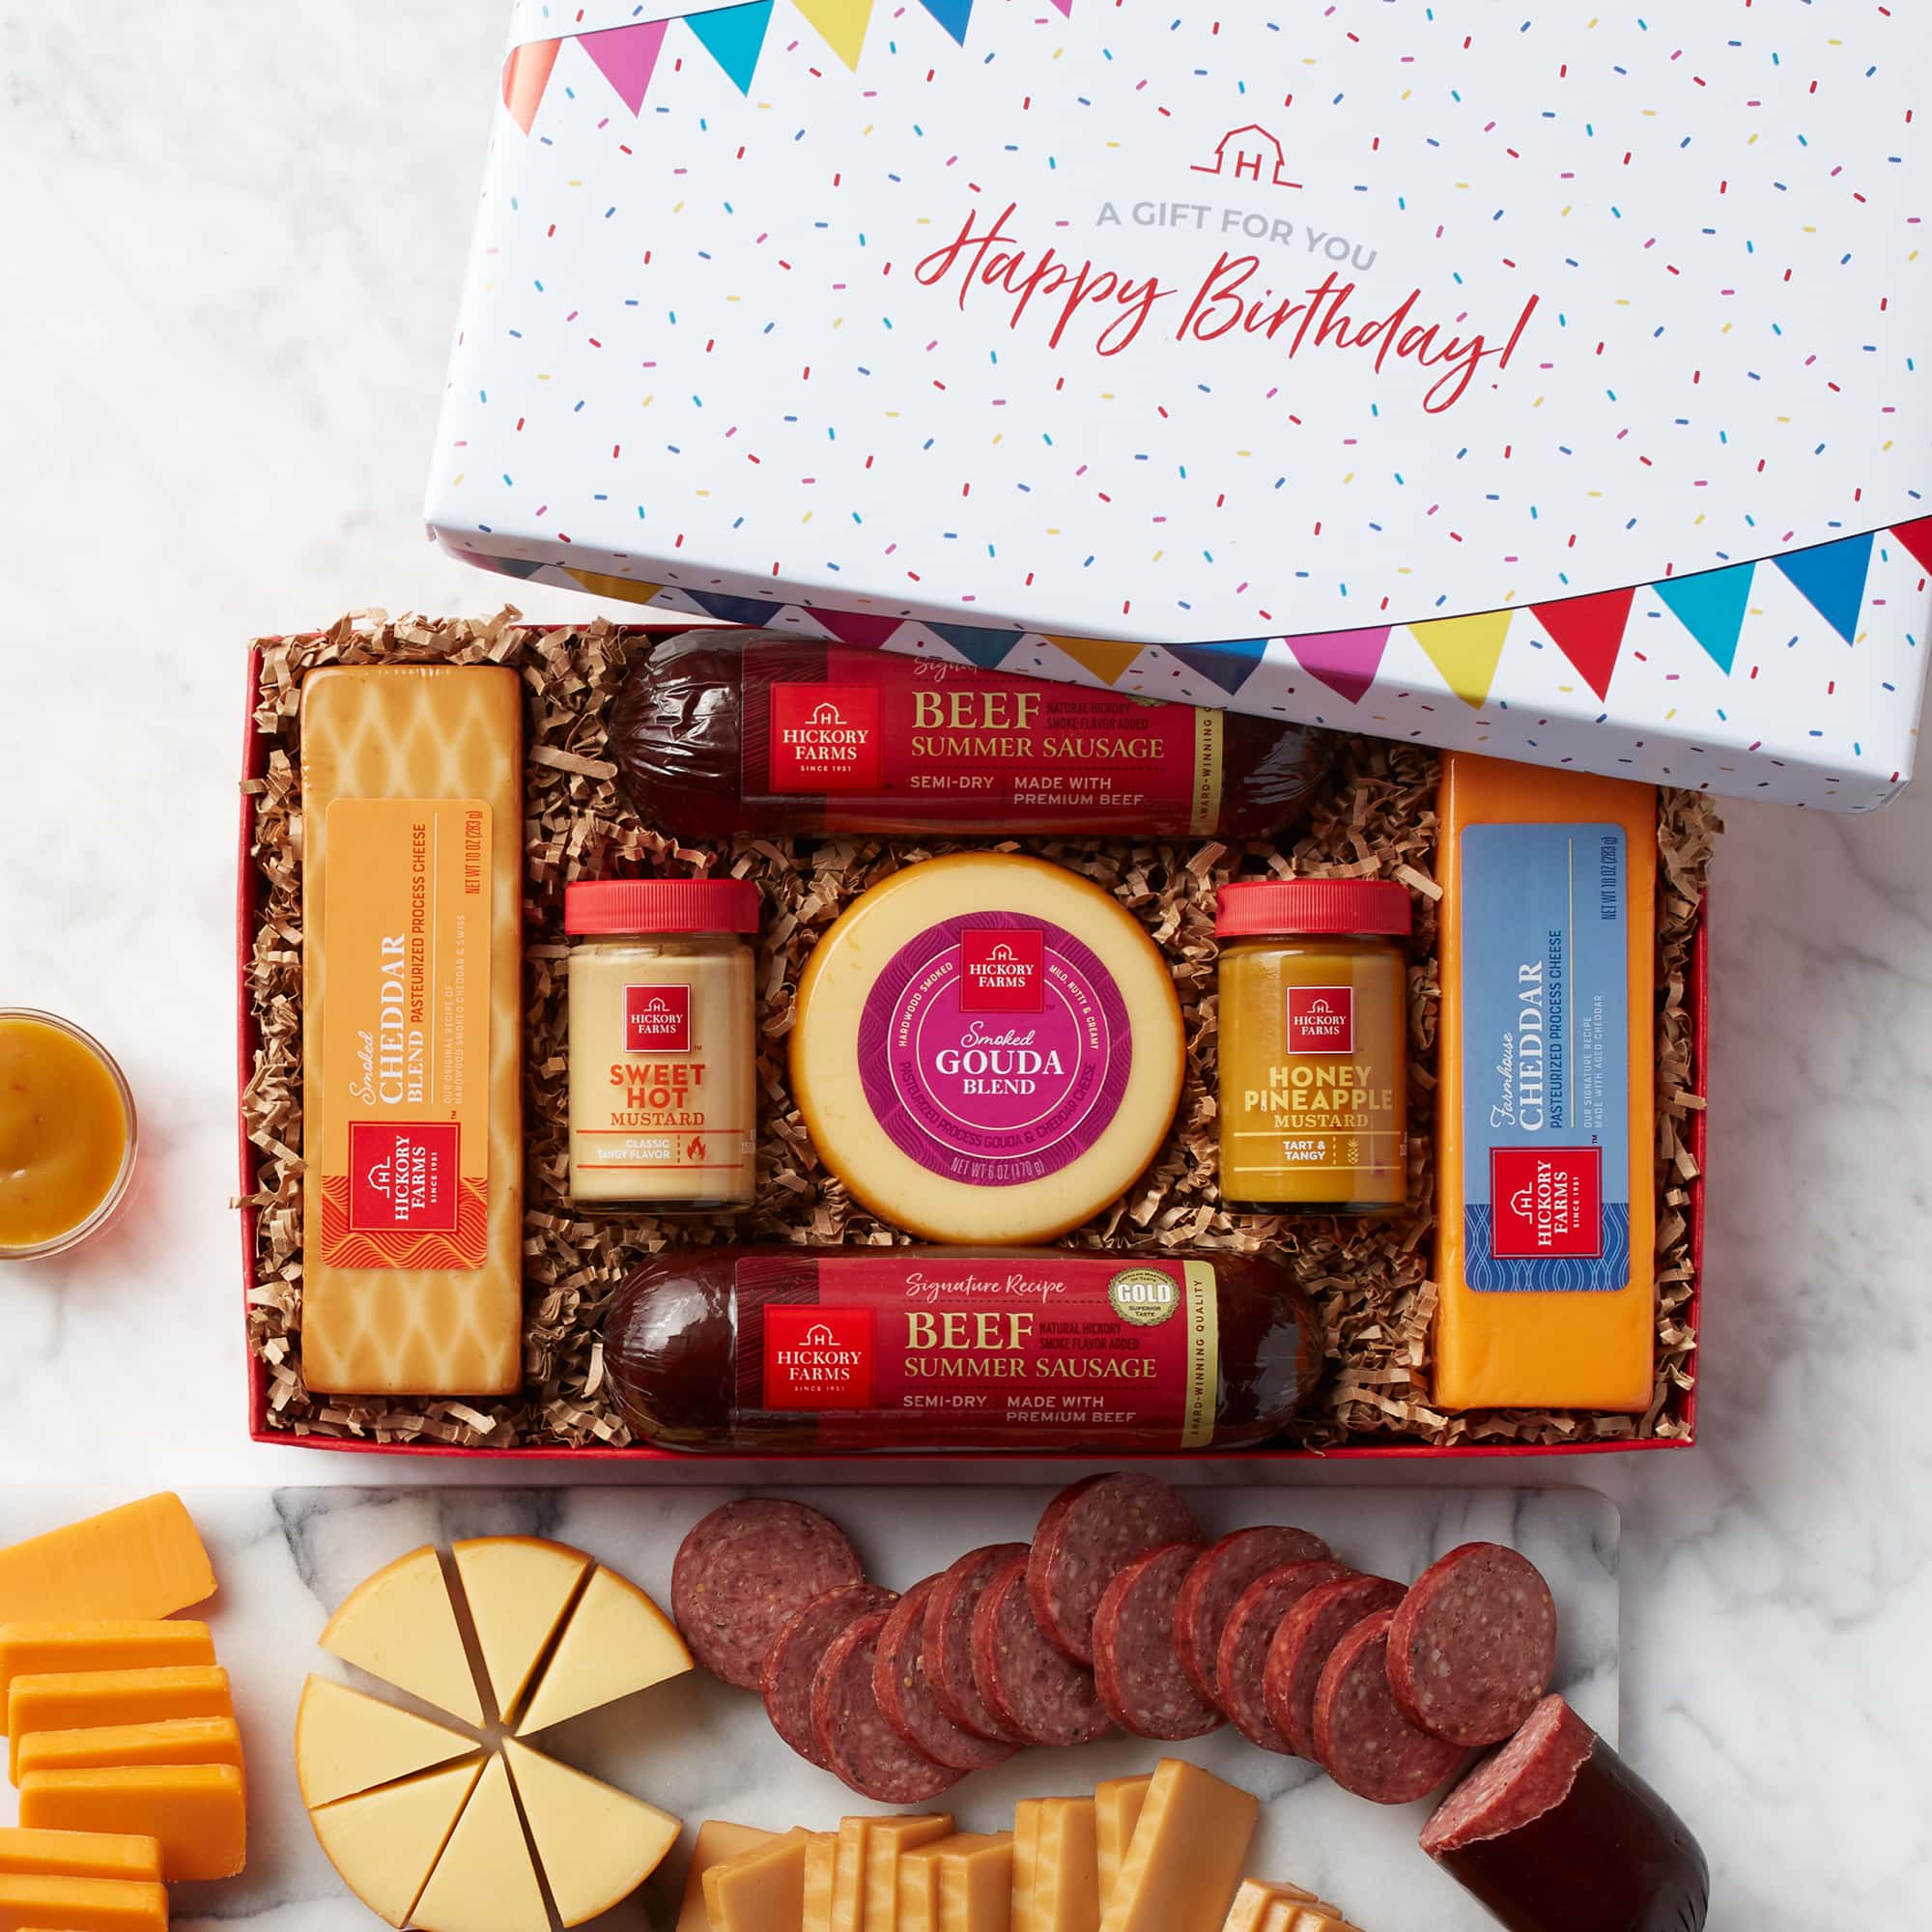 https://www.hickoryfarms.com/on/demandware.static/-/Sites-Web-Master-Catalog/default/dw7545ec19/images/products/birthday-summer-sausage-and-cheese-gift-box-000265-1.jpg